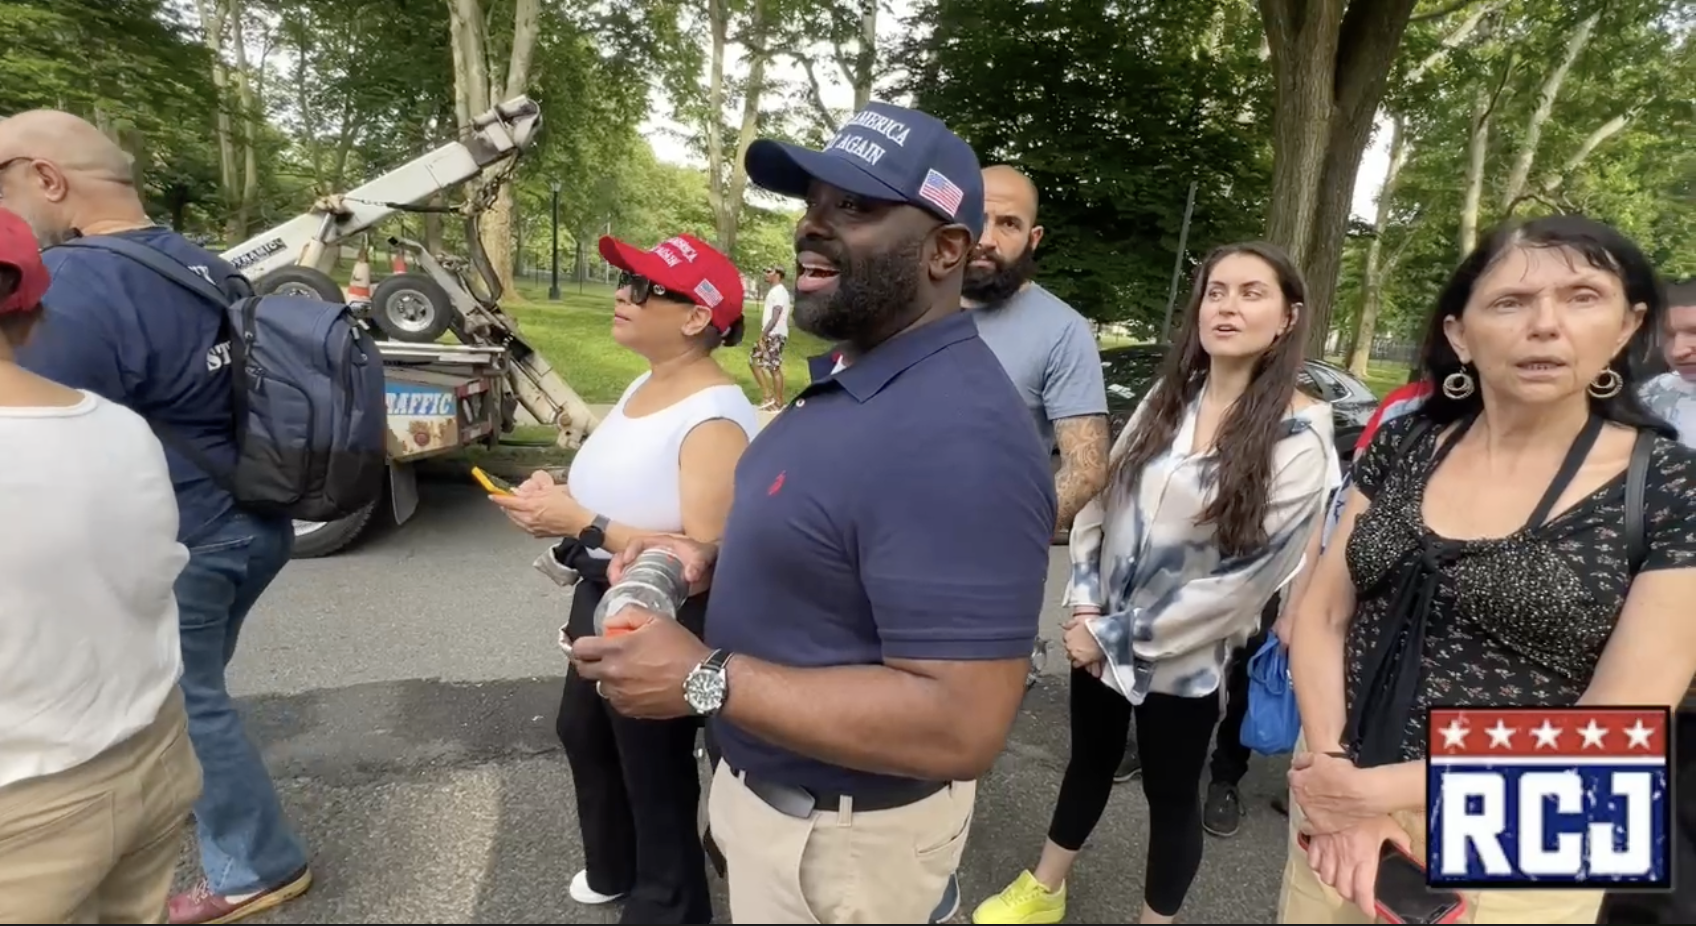 Video Shows MASSIVE Turnout For Trump At Bronx Rally – “Line Stretches Back For Over a Mile!”